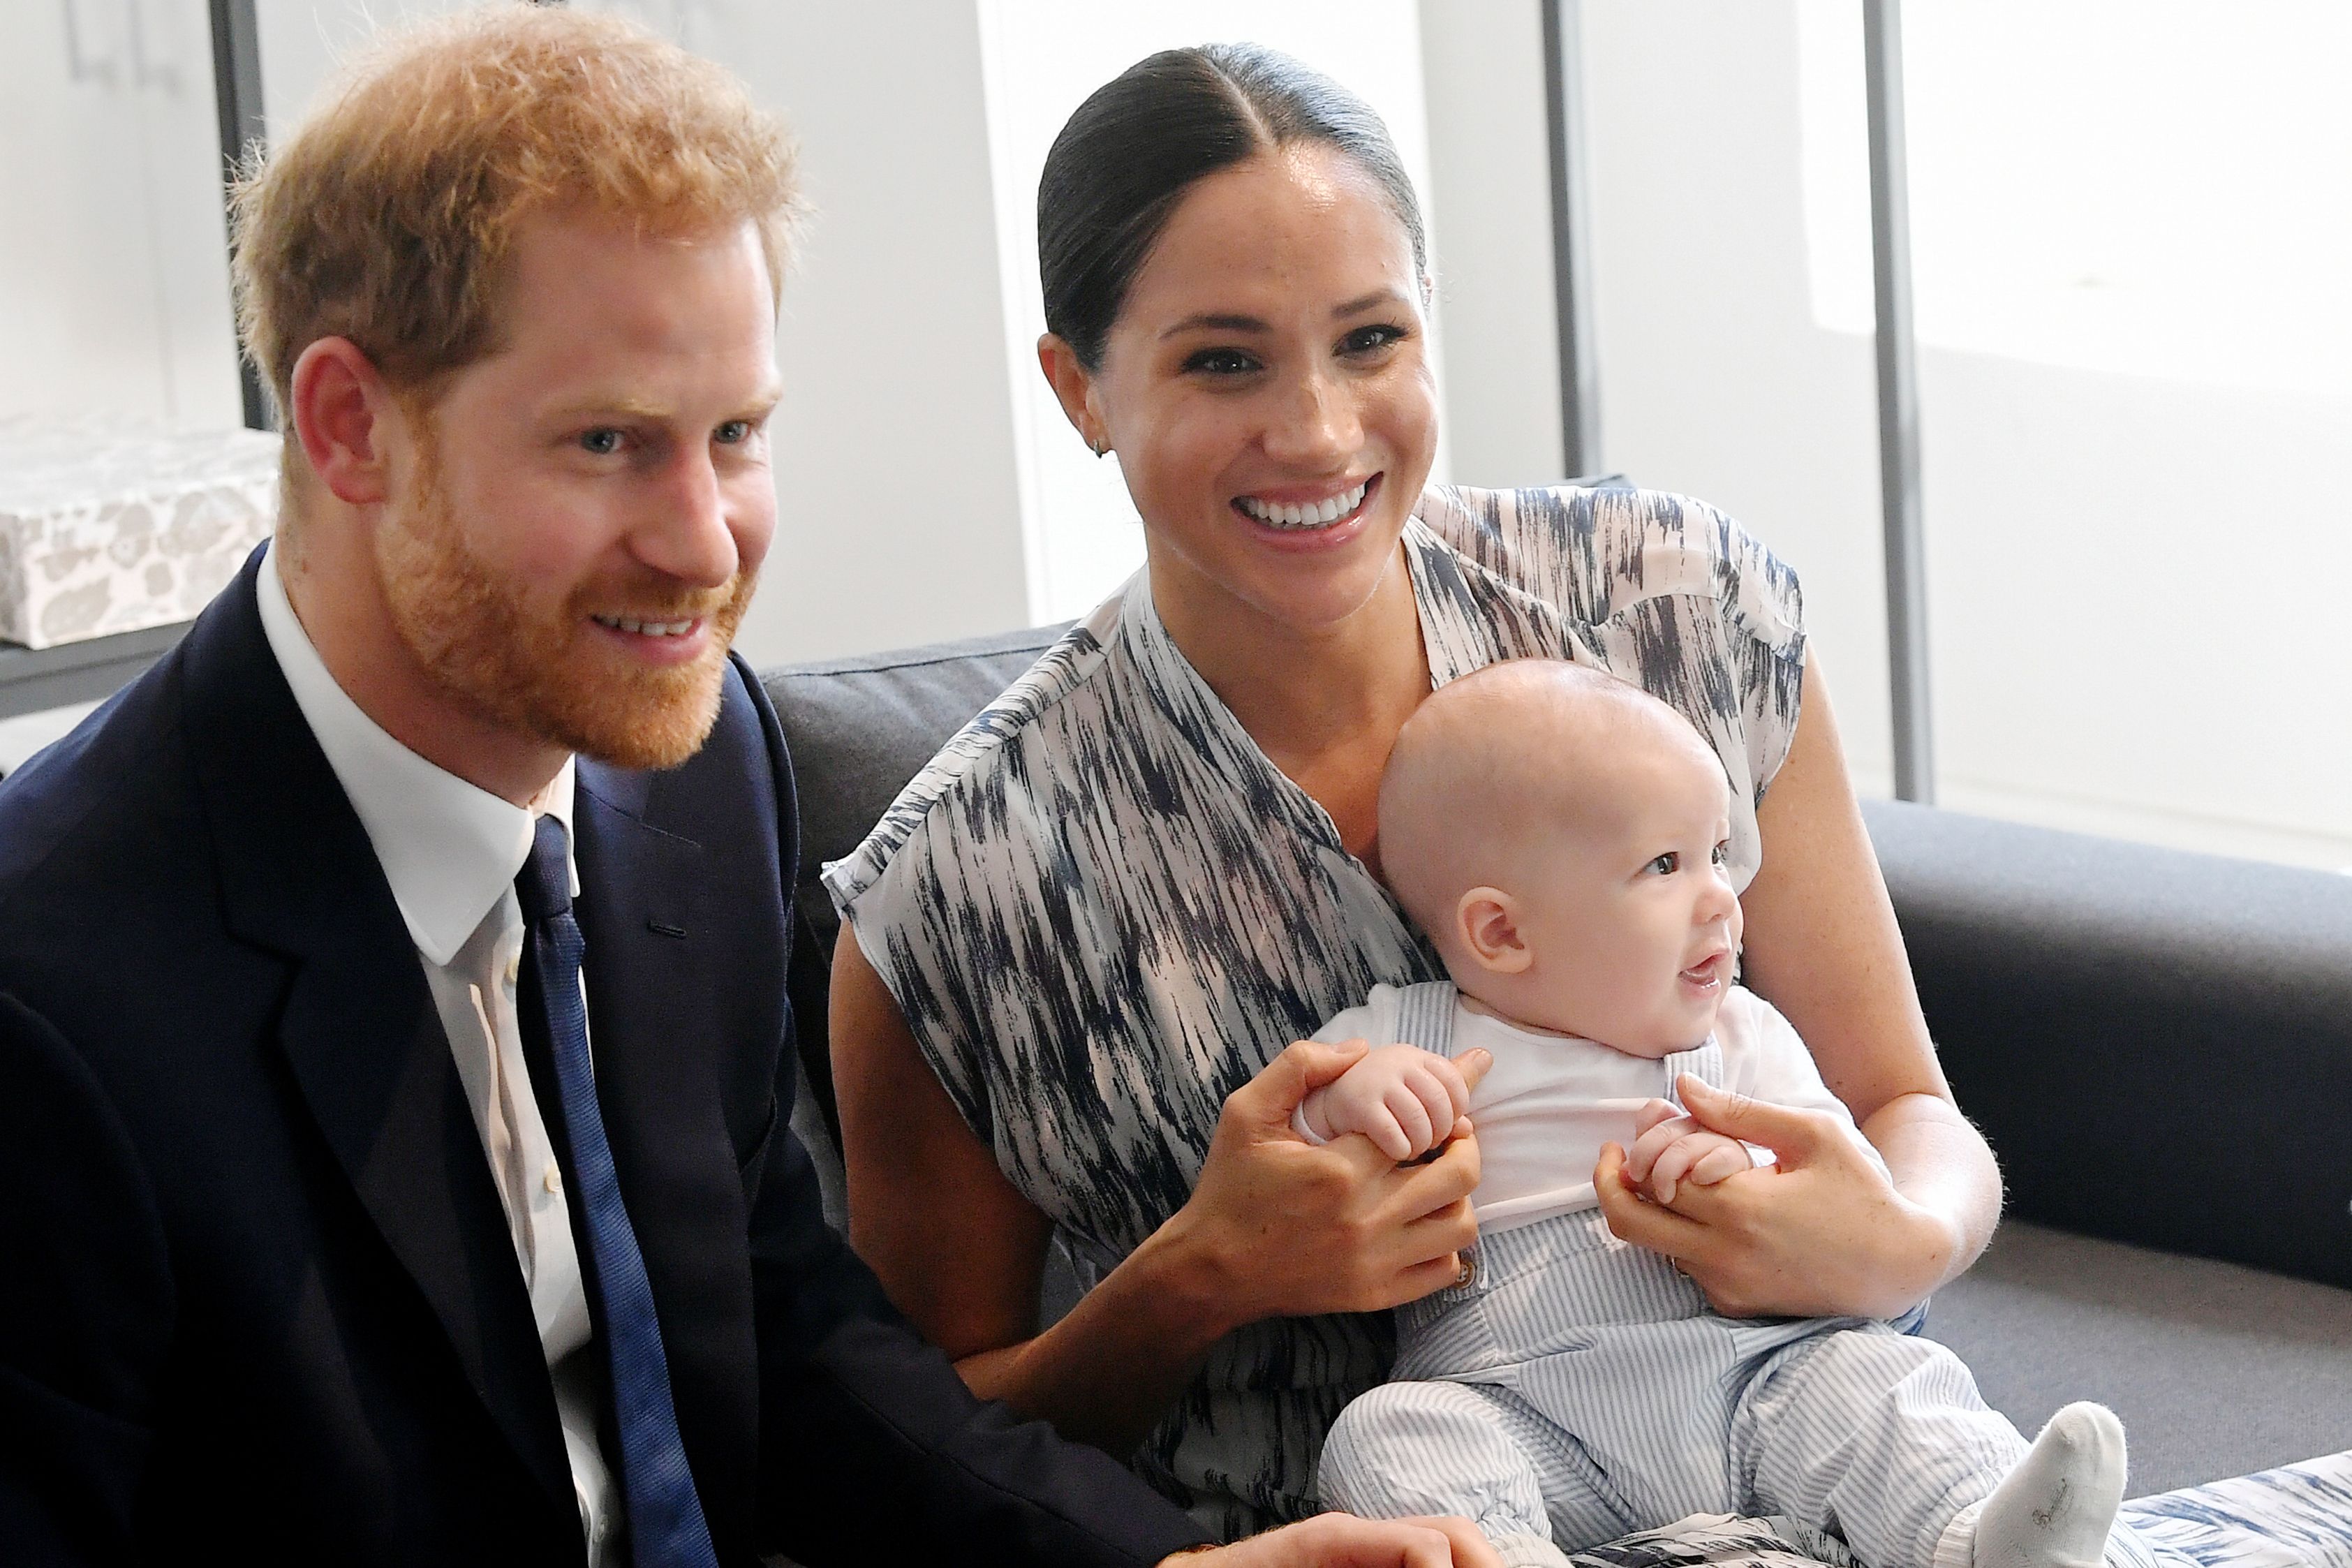 Prince Harry, Meghan Markle, and their baby son Archie Mountbatten-Windsor meet Archbishop Desmond Tutu in South Africa on September 25, 2019 | Photo: Getty Images